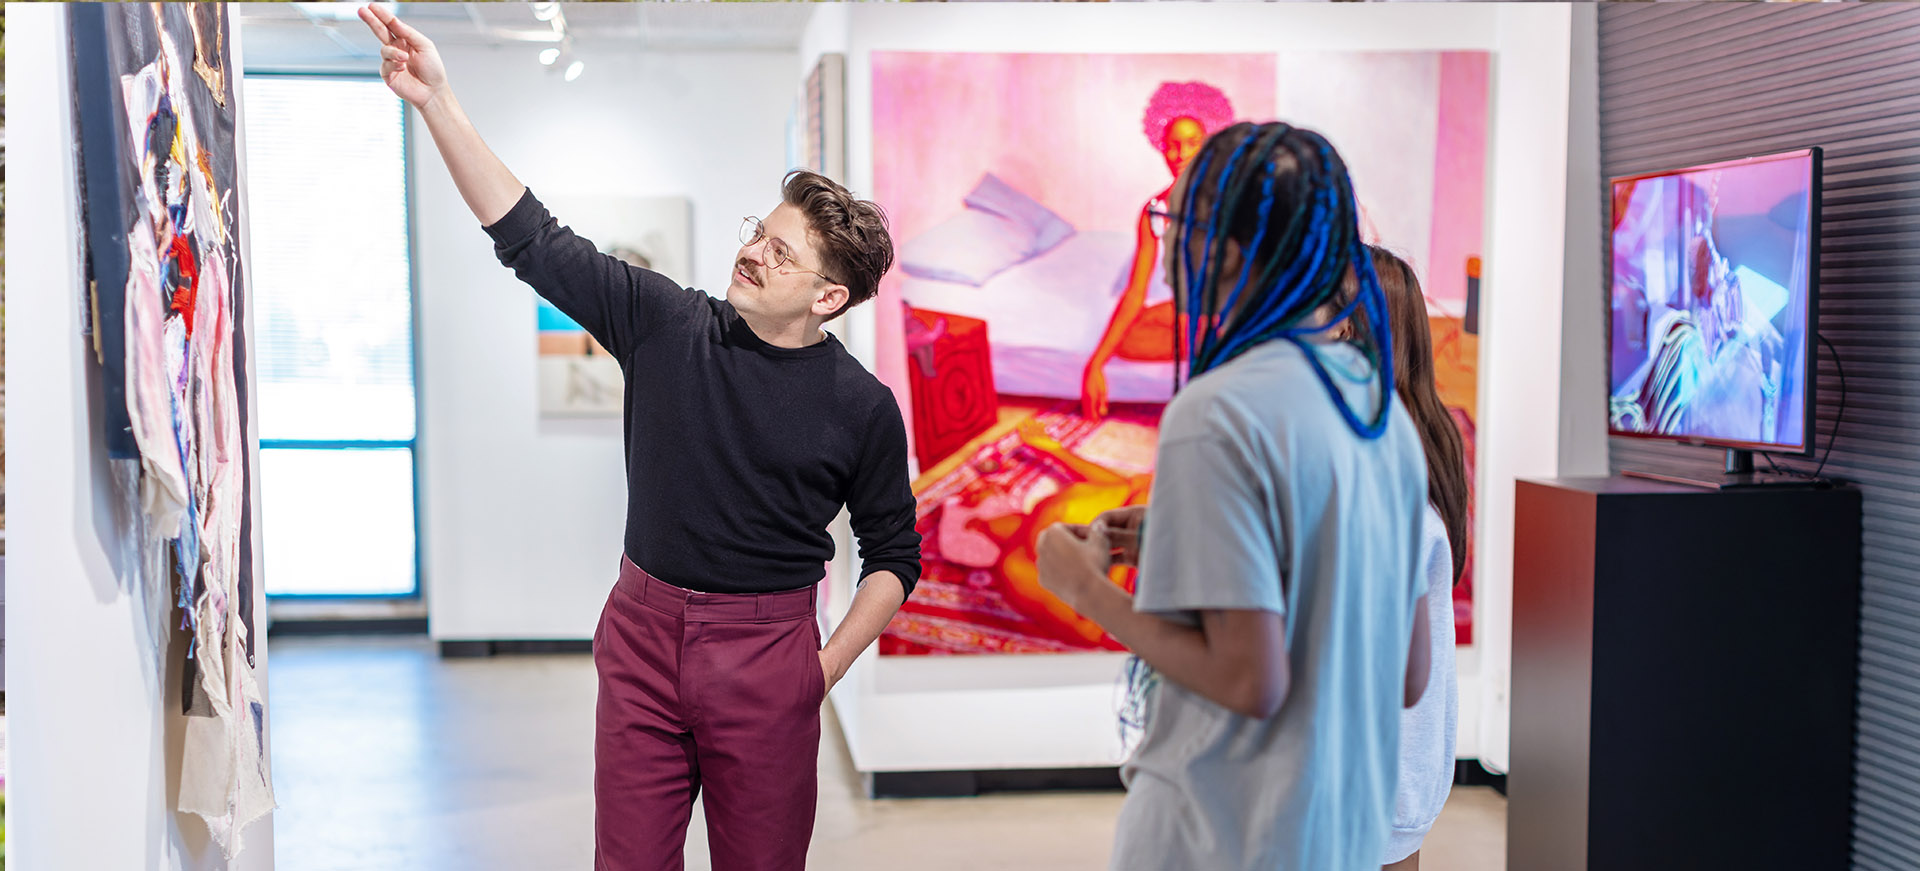 a professor discusses an artwork with students in a gallery